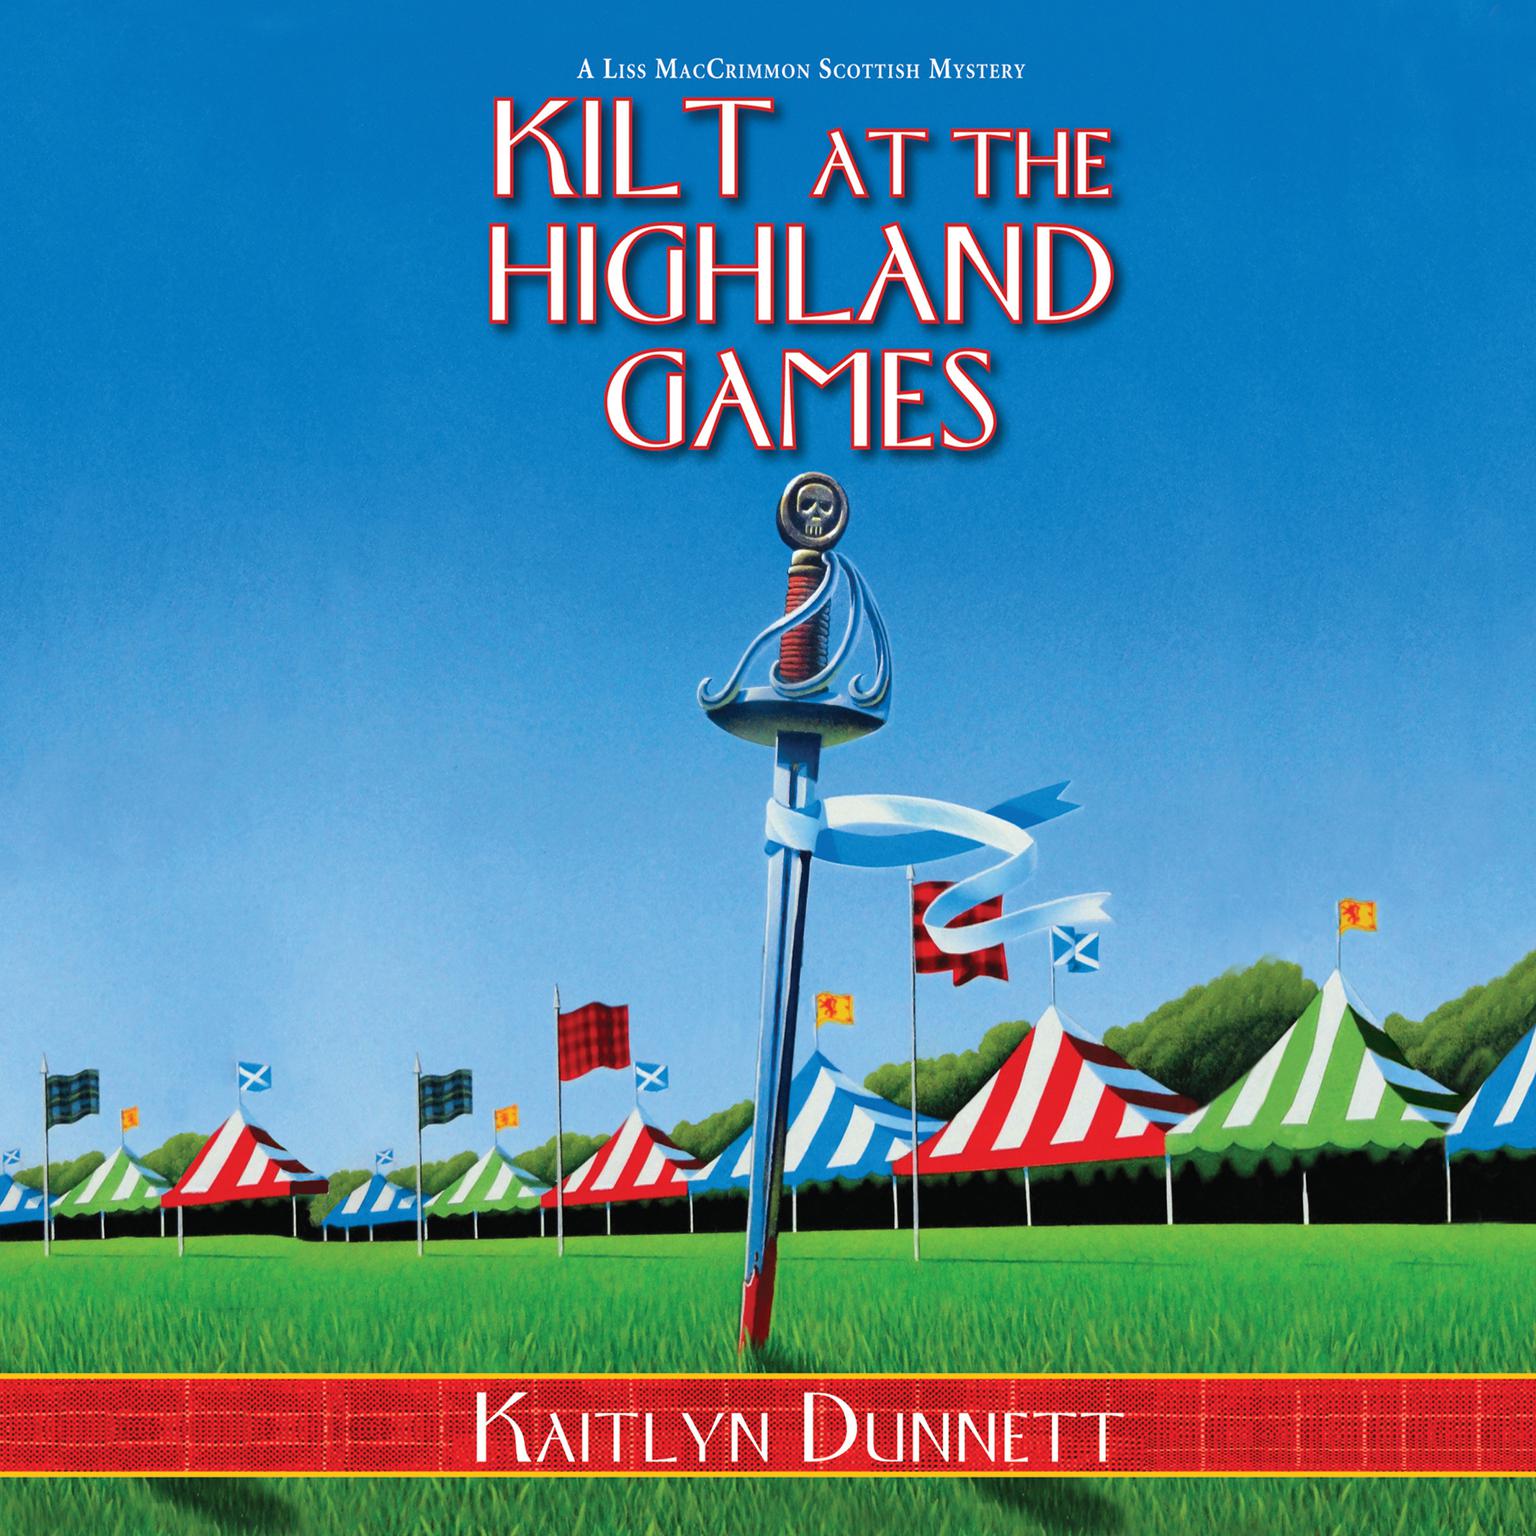 Kilt at the Highland Games: A Liss MacCrimmon Scottish Mystery Audiobook, by Kaitlyn Dunnett